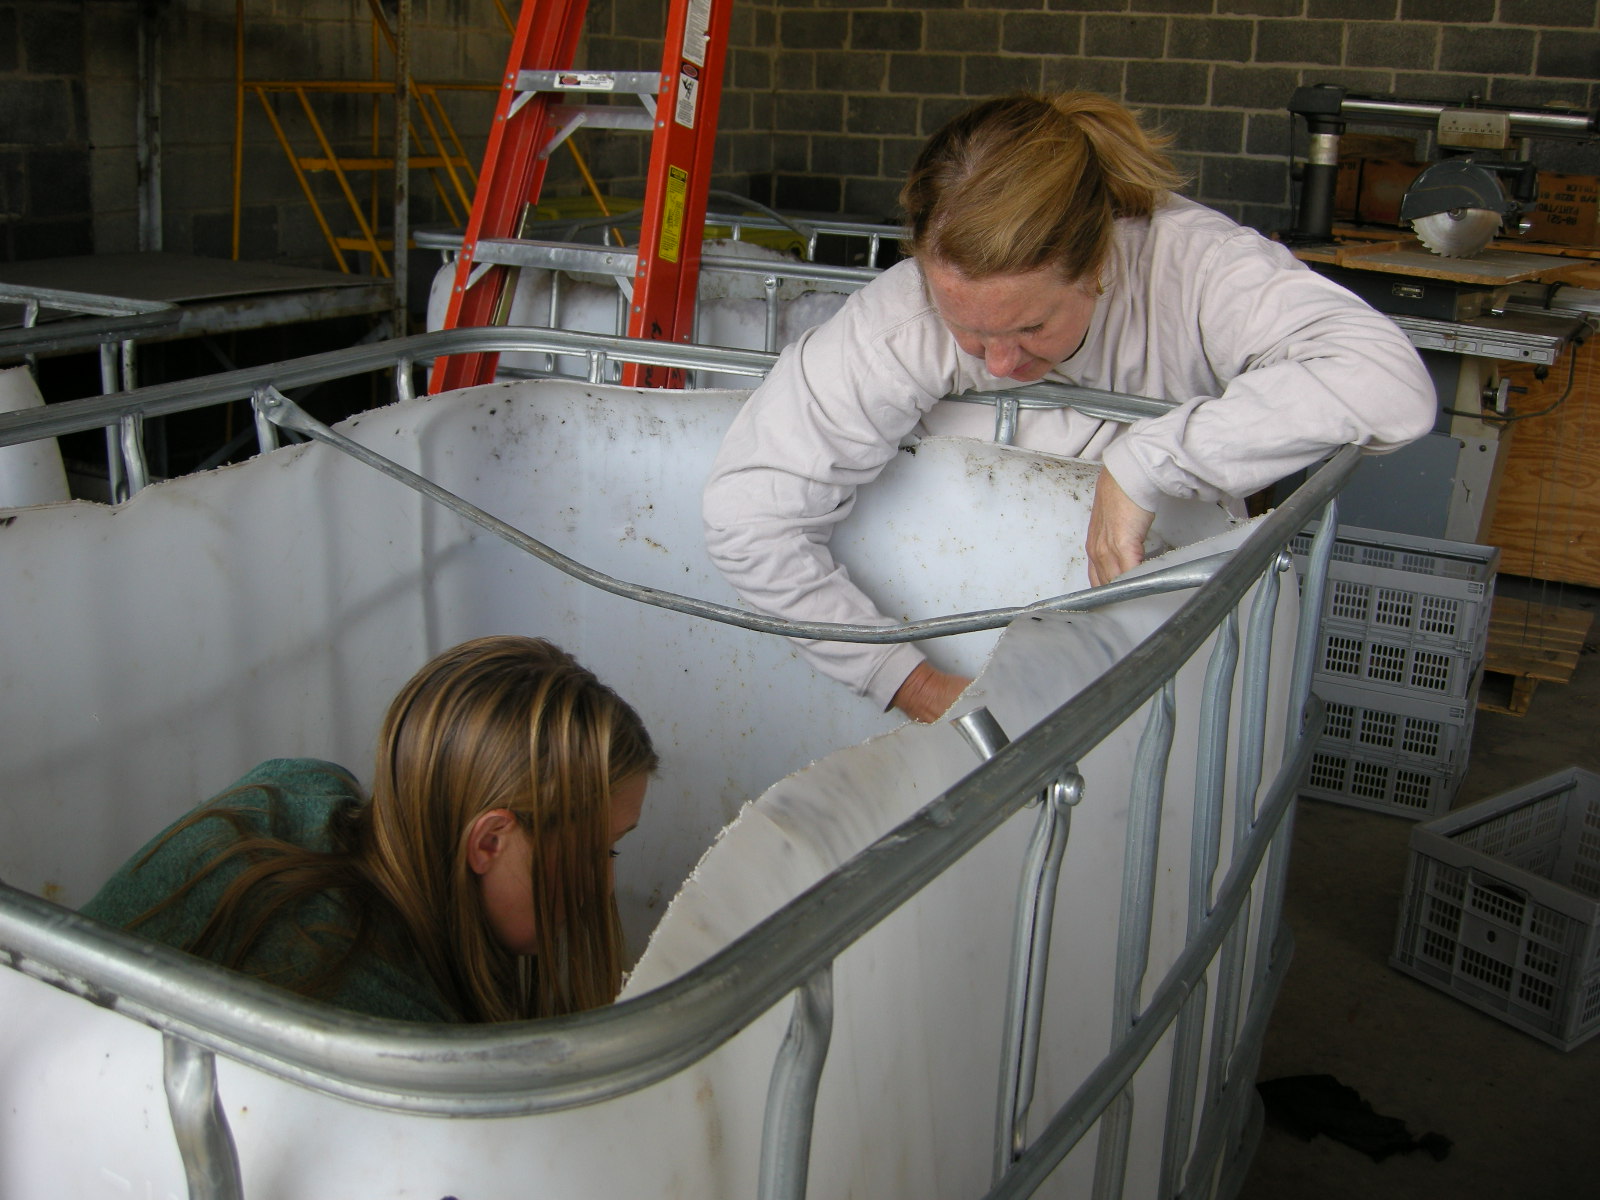 This photograph shows two people working in a large bin.